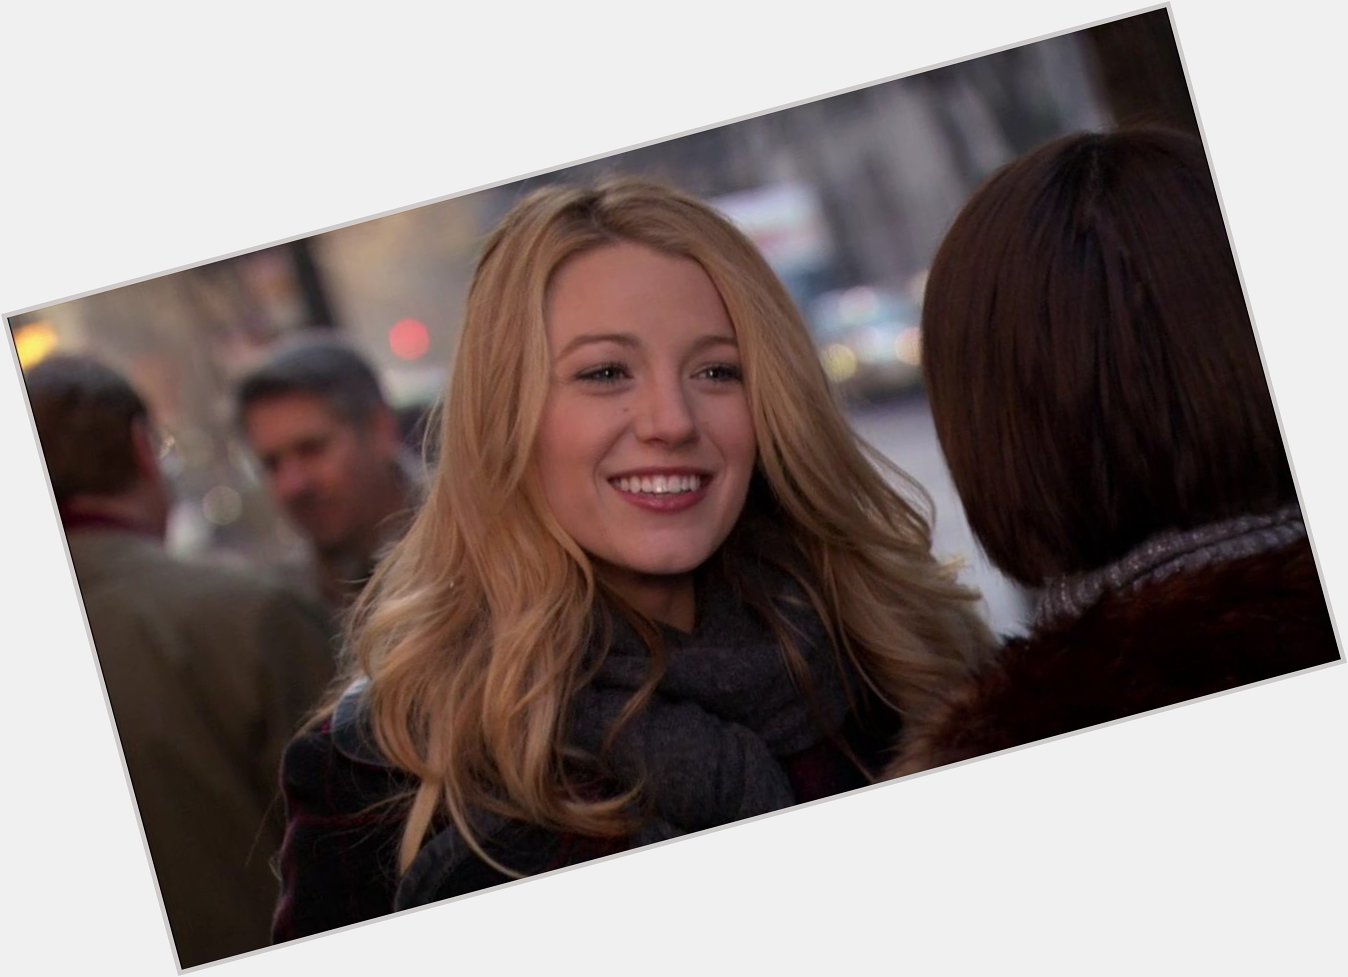 Happy birthday to blake lively, the one and only serena van der woodsen that we all know ! 